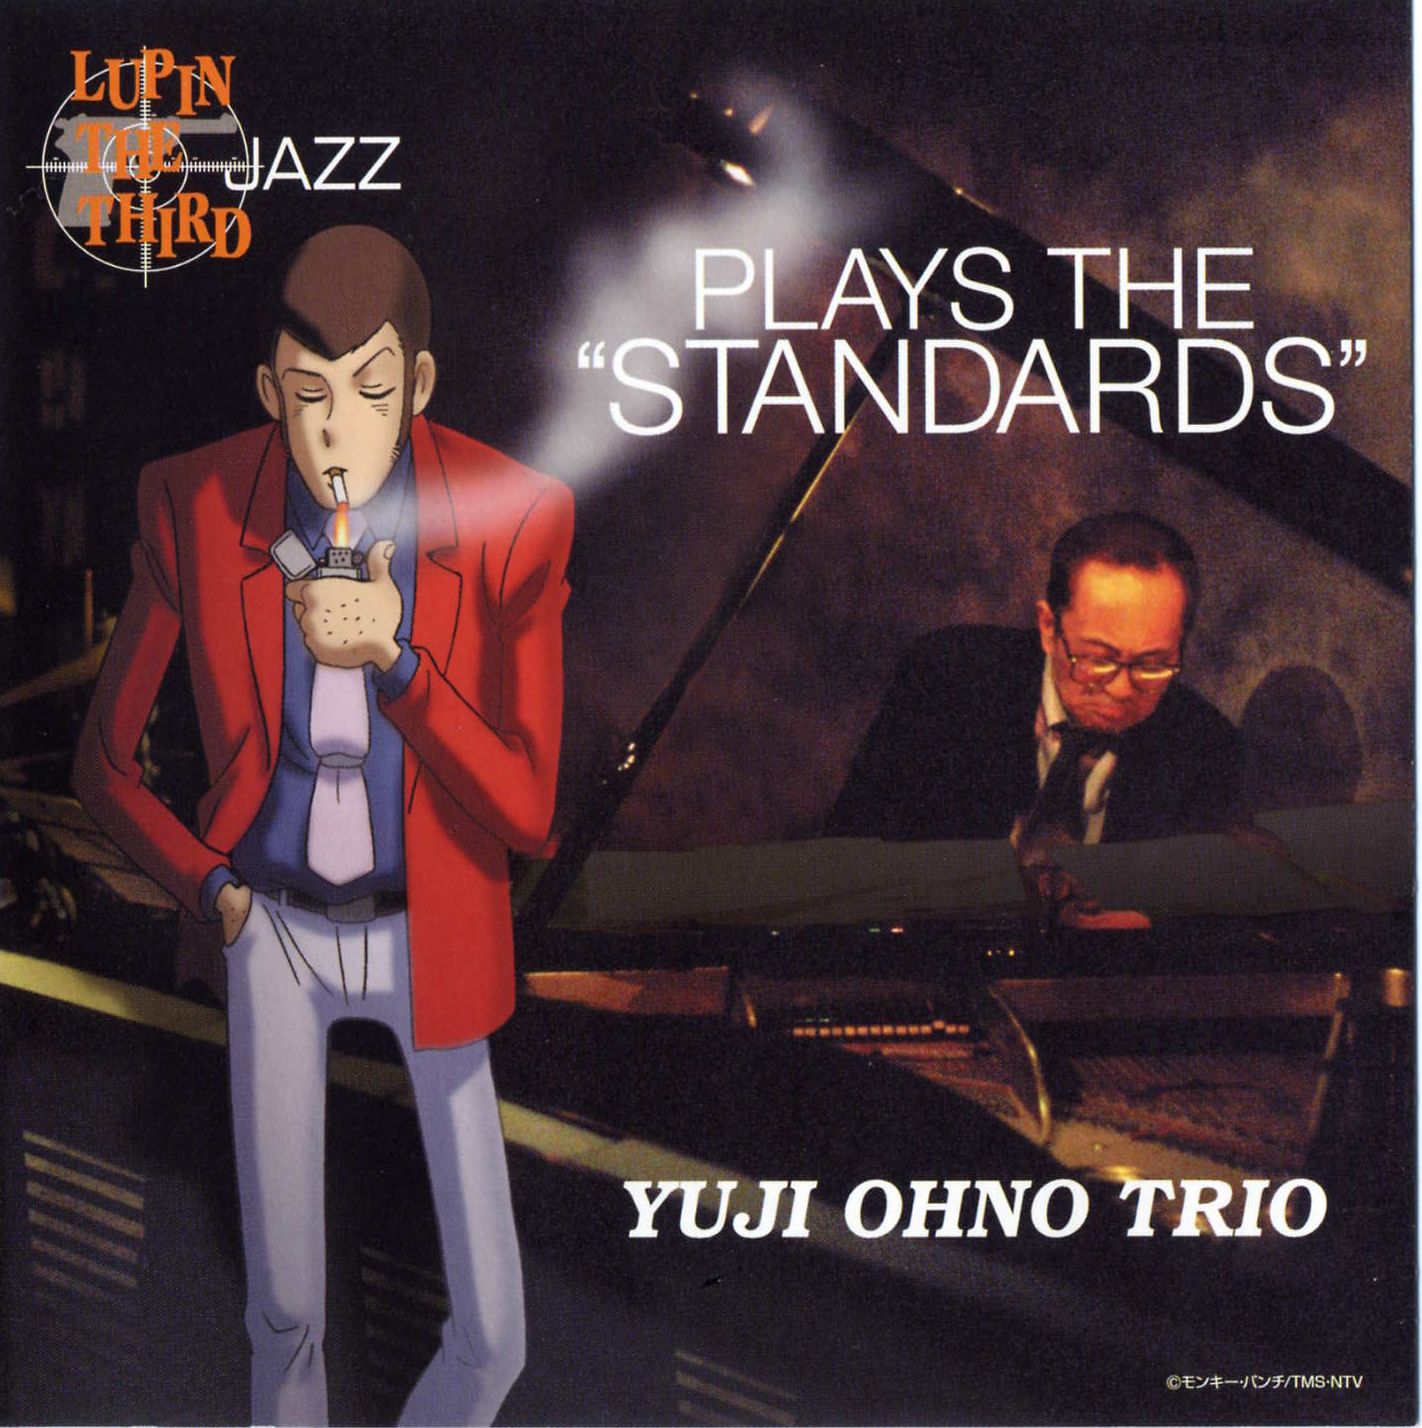 YUJI OHNO - Lupin the Third Jazz: Plays the Standards cover 